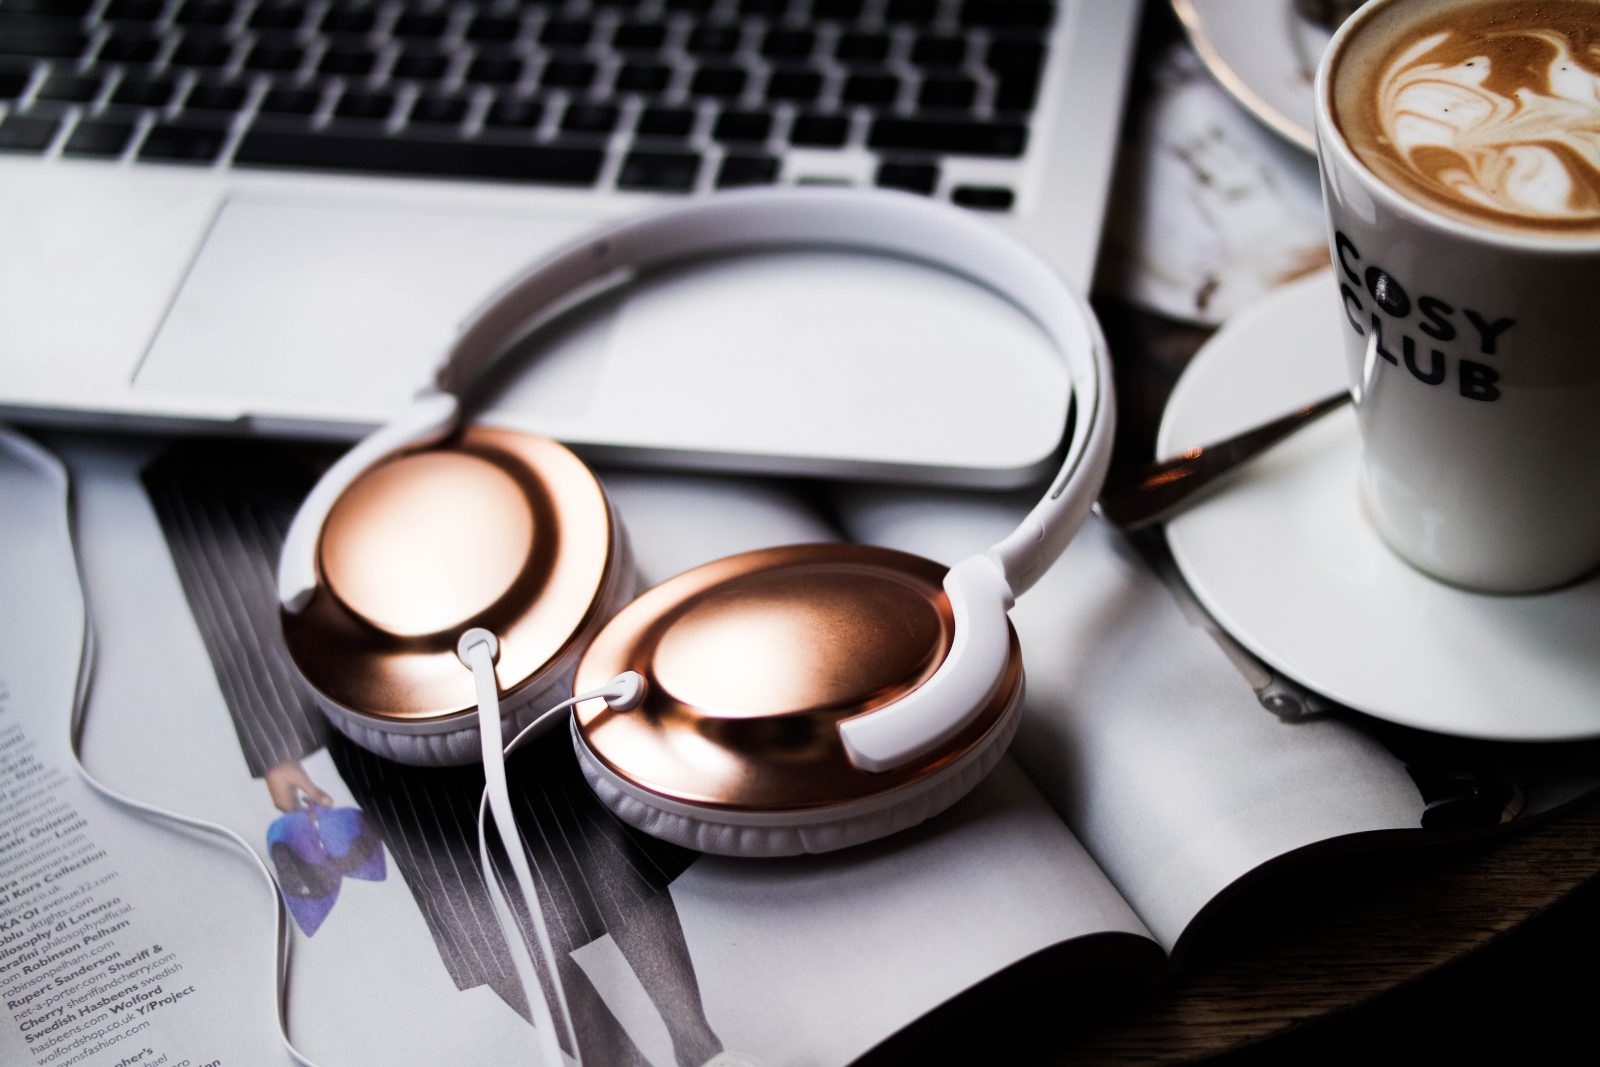 Youtube Editing on The Go - Rose Gold Headphones 